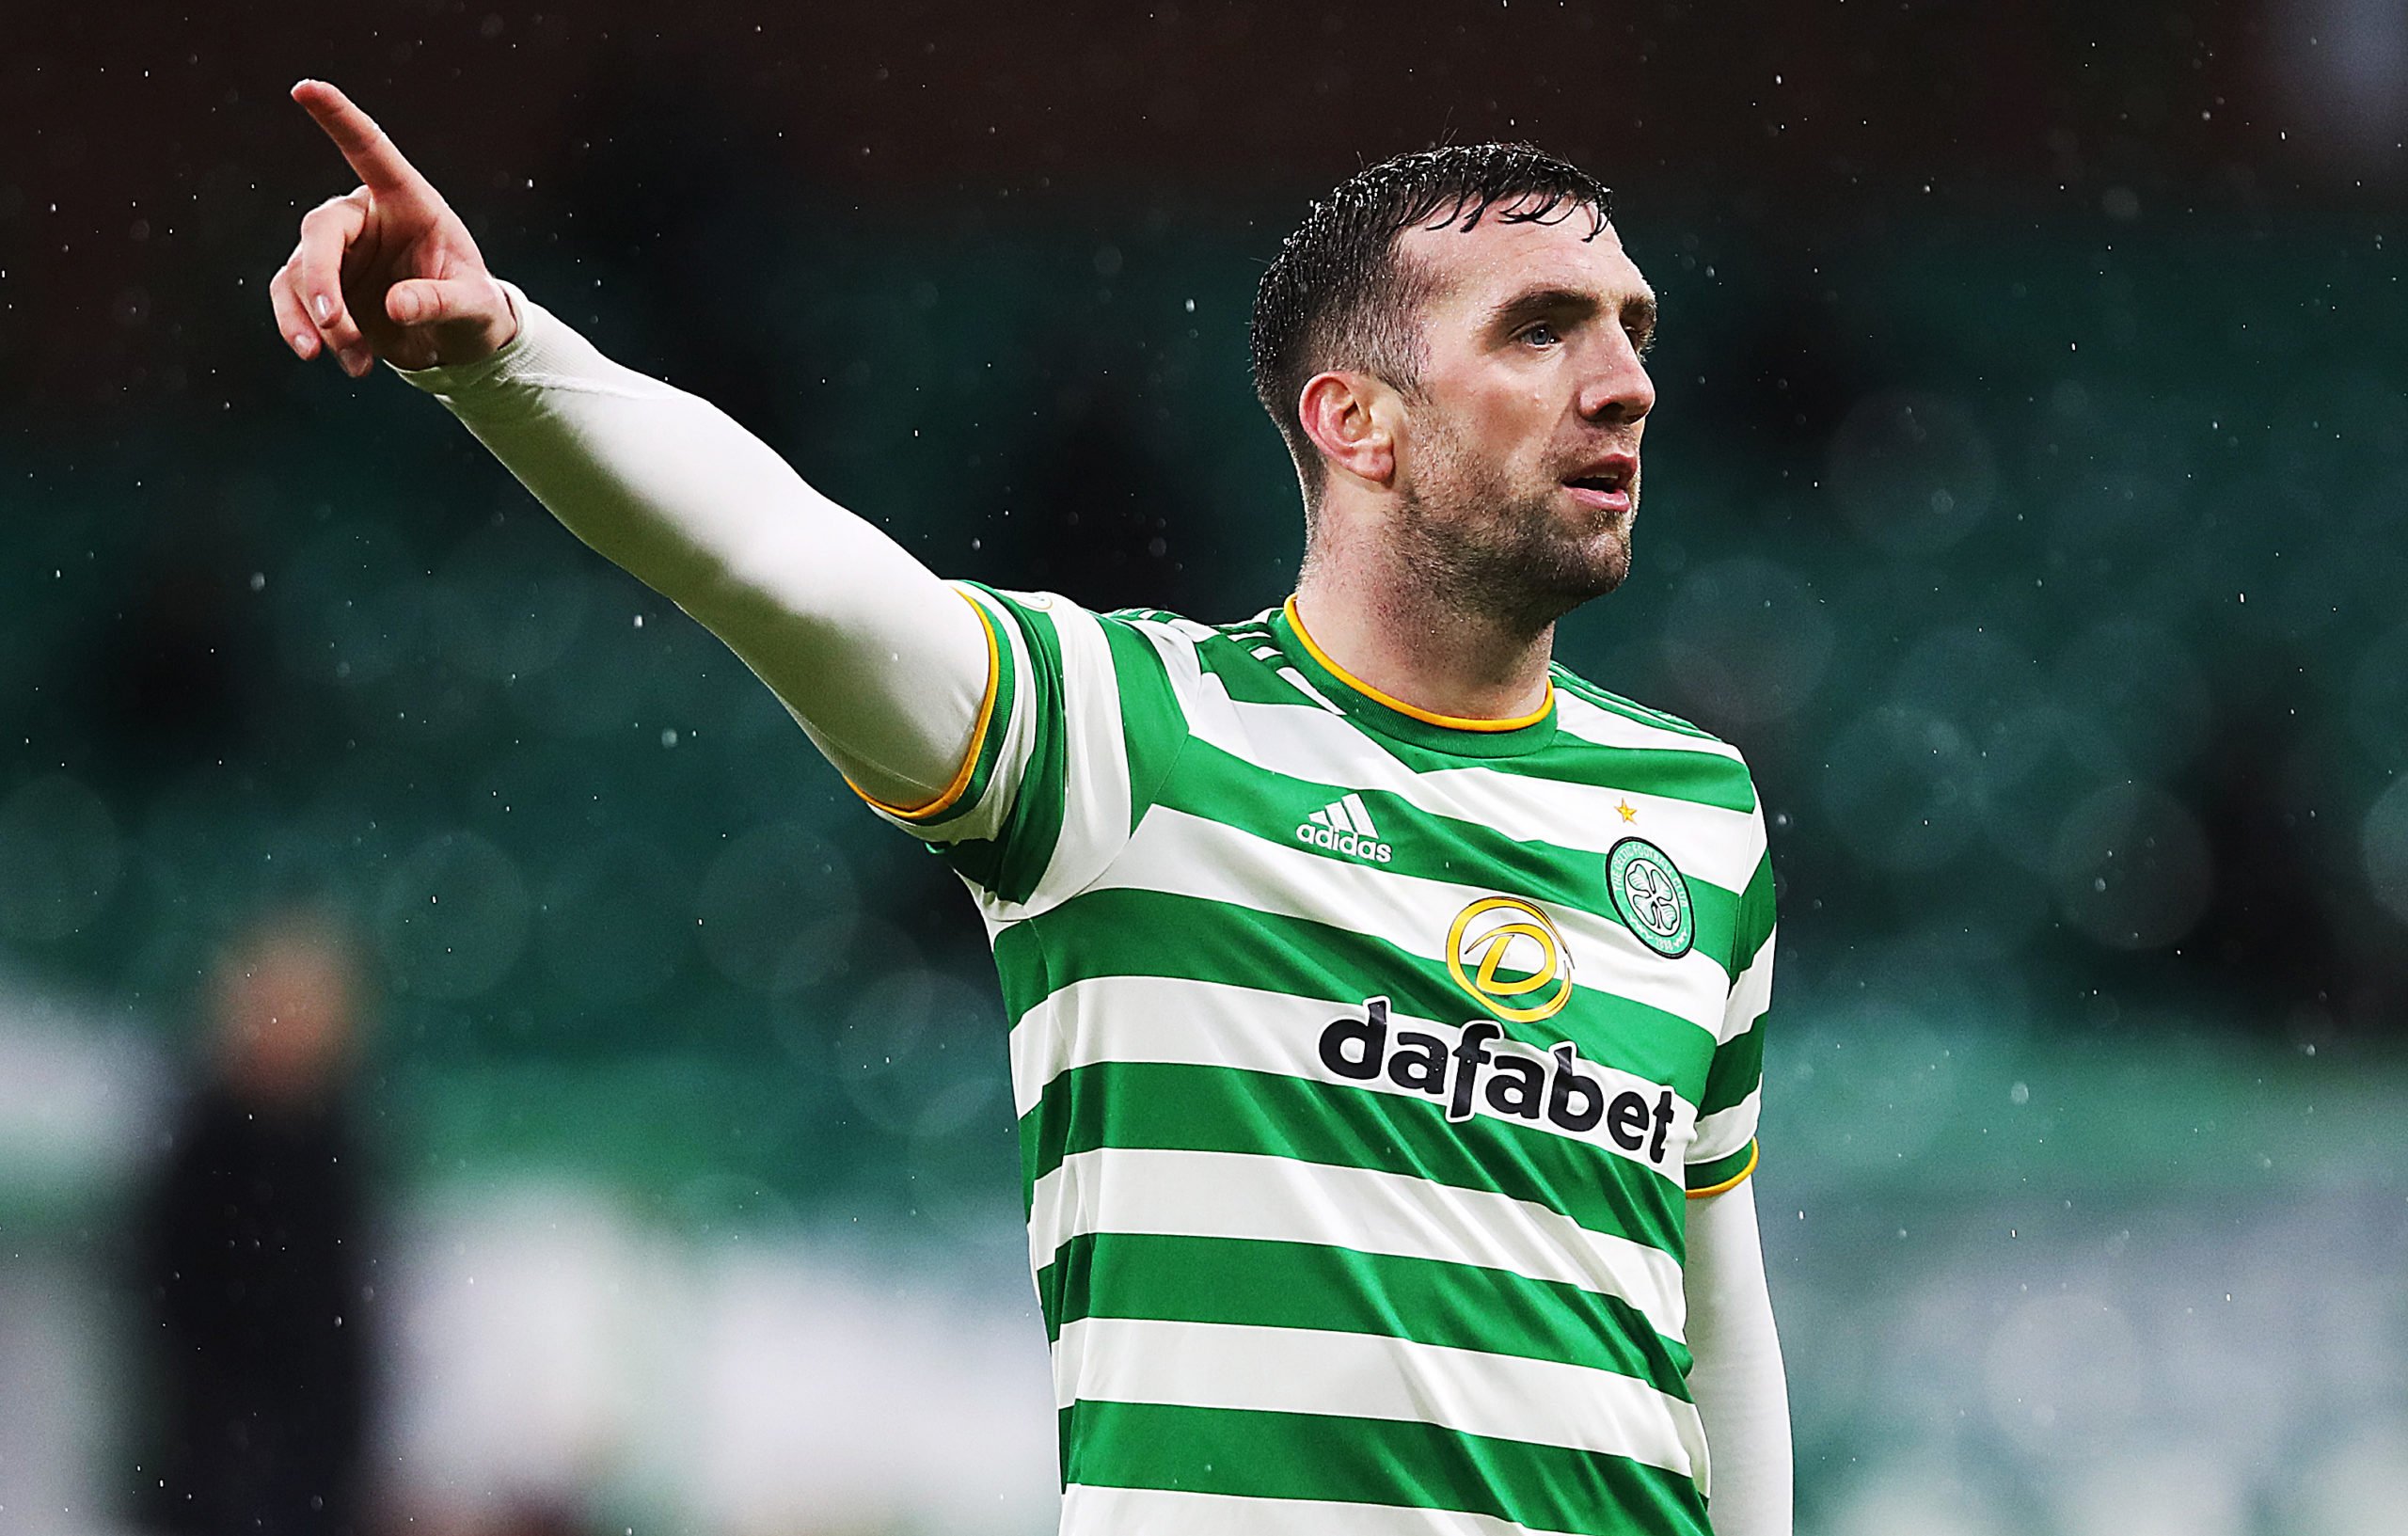 Shane Duffy has been one of several failed loan signings this season